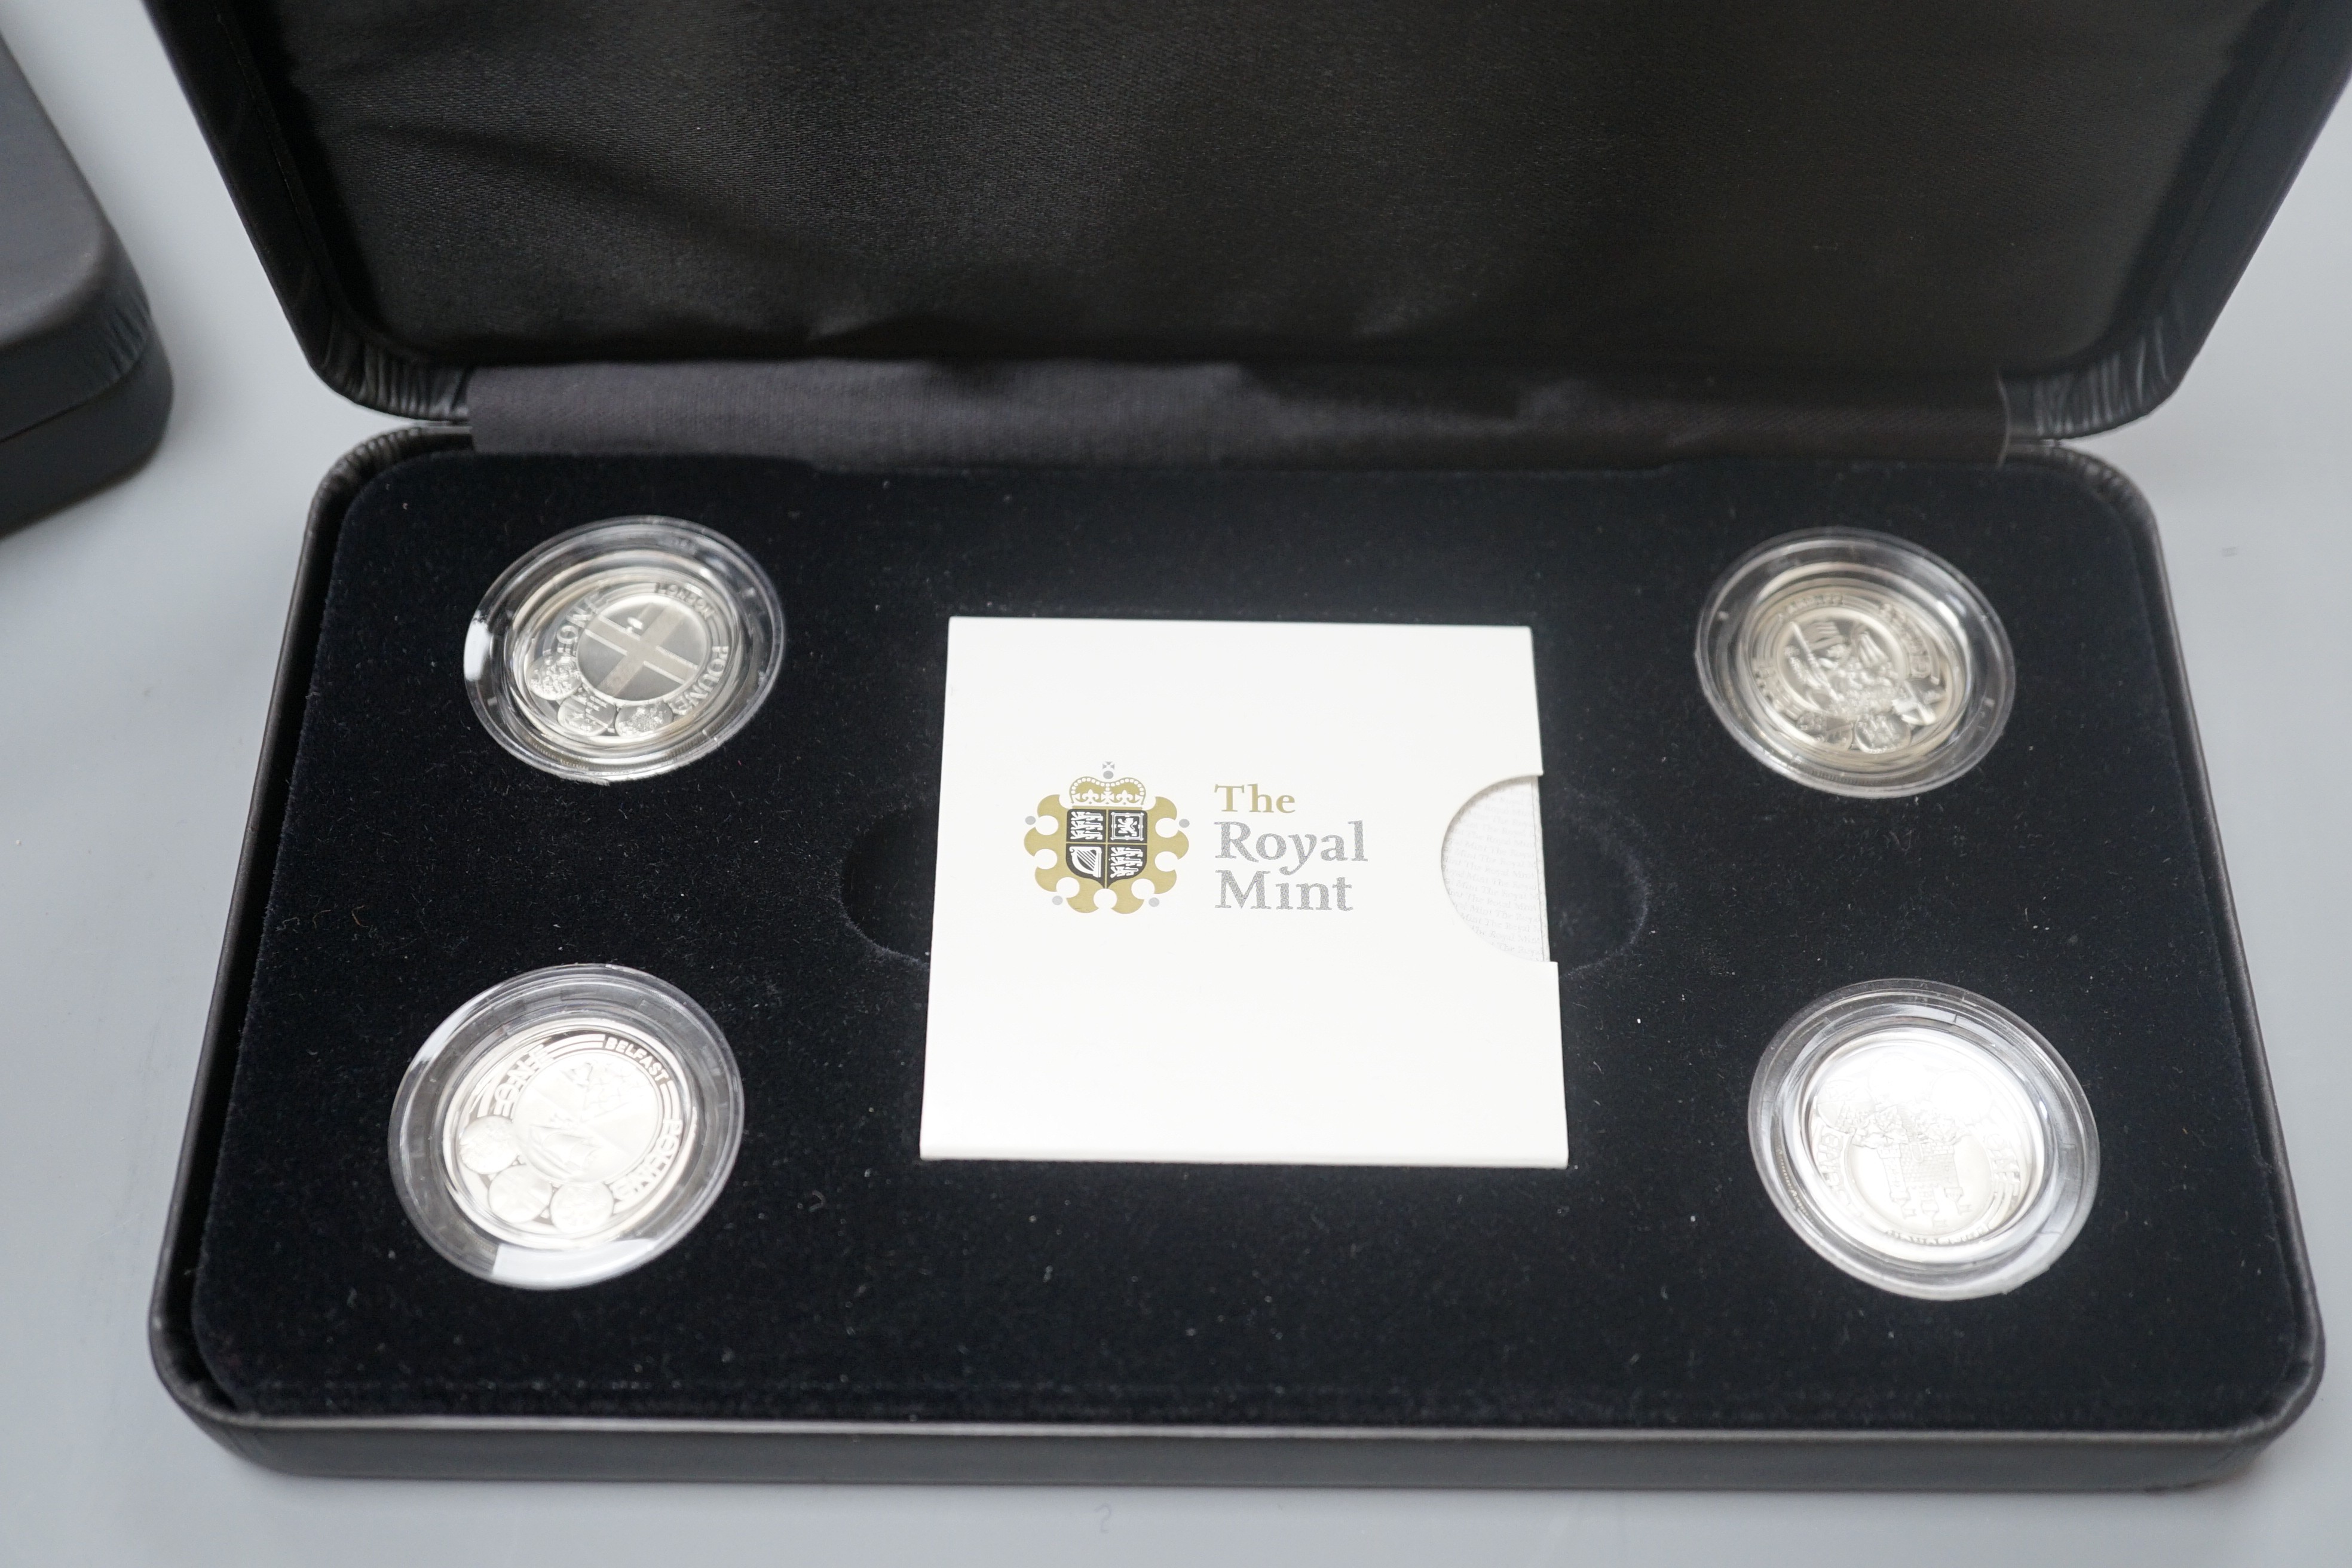 A cased Royal Mint UK Piedfort collection of silver proof coins 2007 and a cased set of four silver proof £1 coins, 2010/11